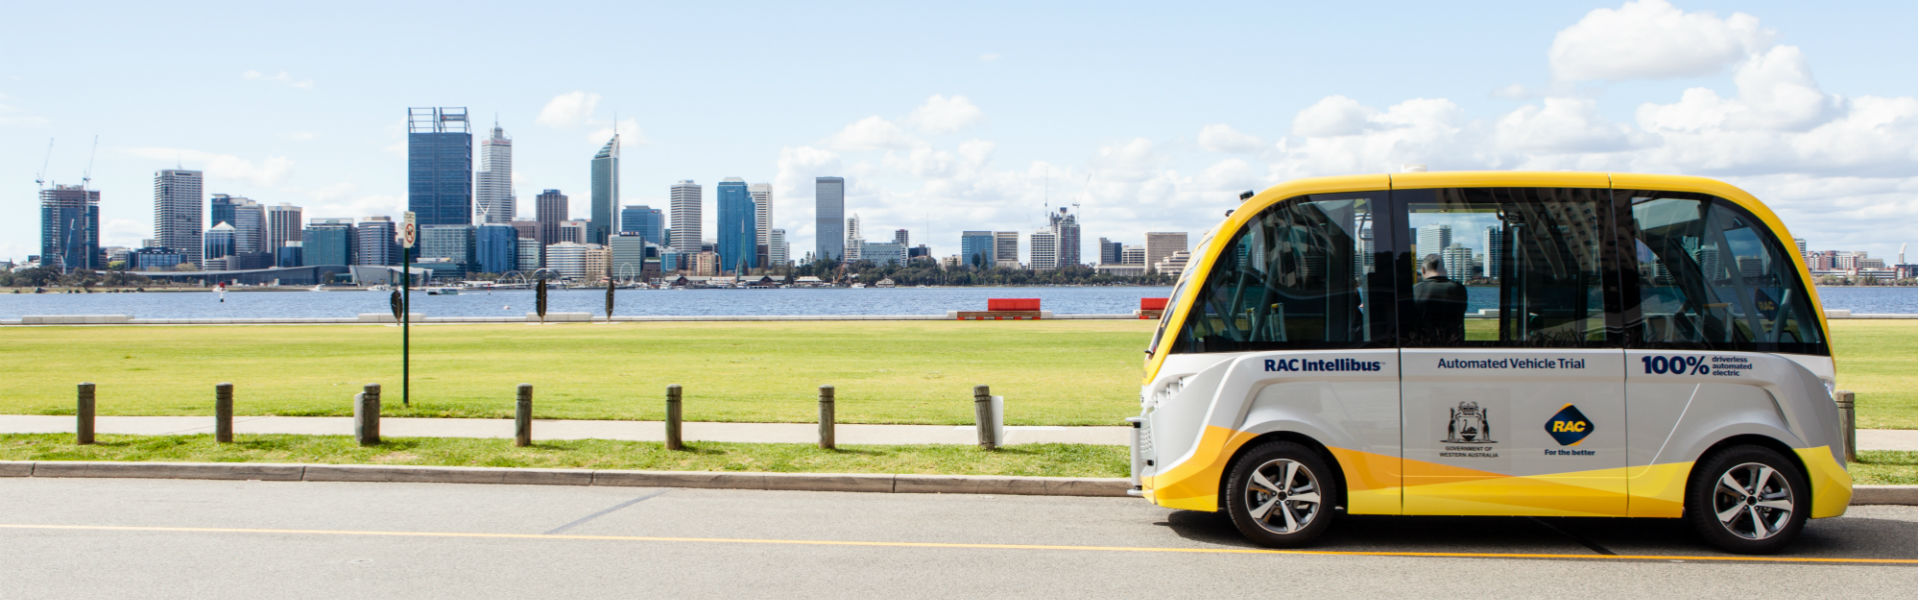 RAC receives global acknowledgement for Automated Vehicle Trial